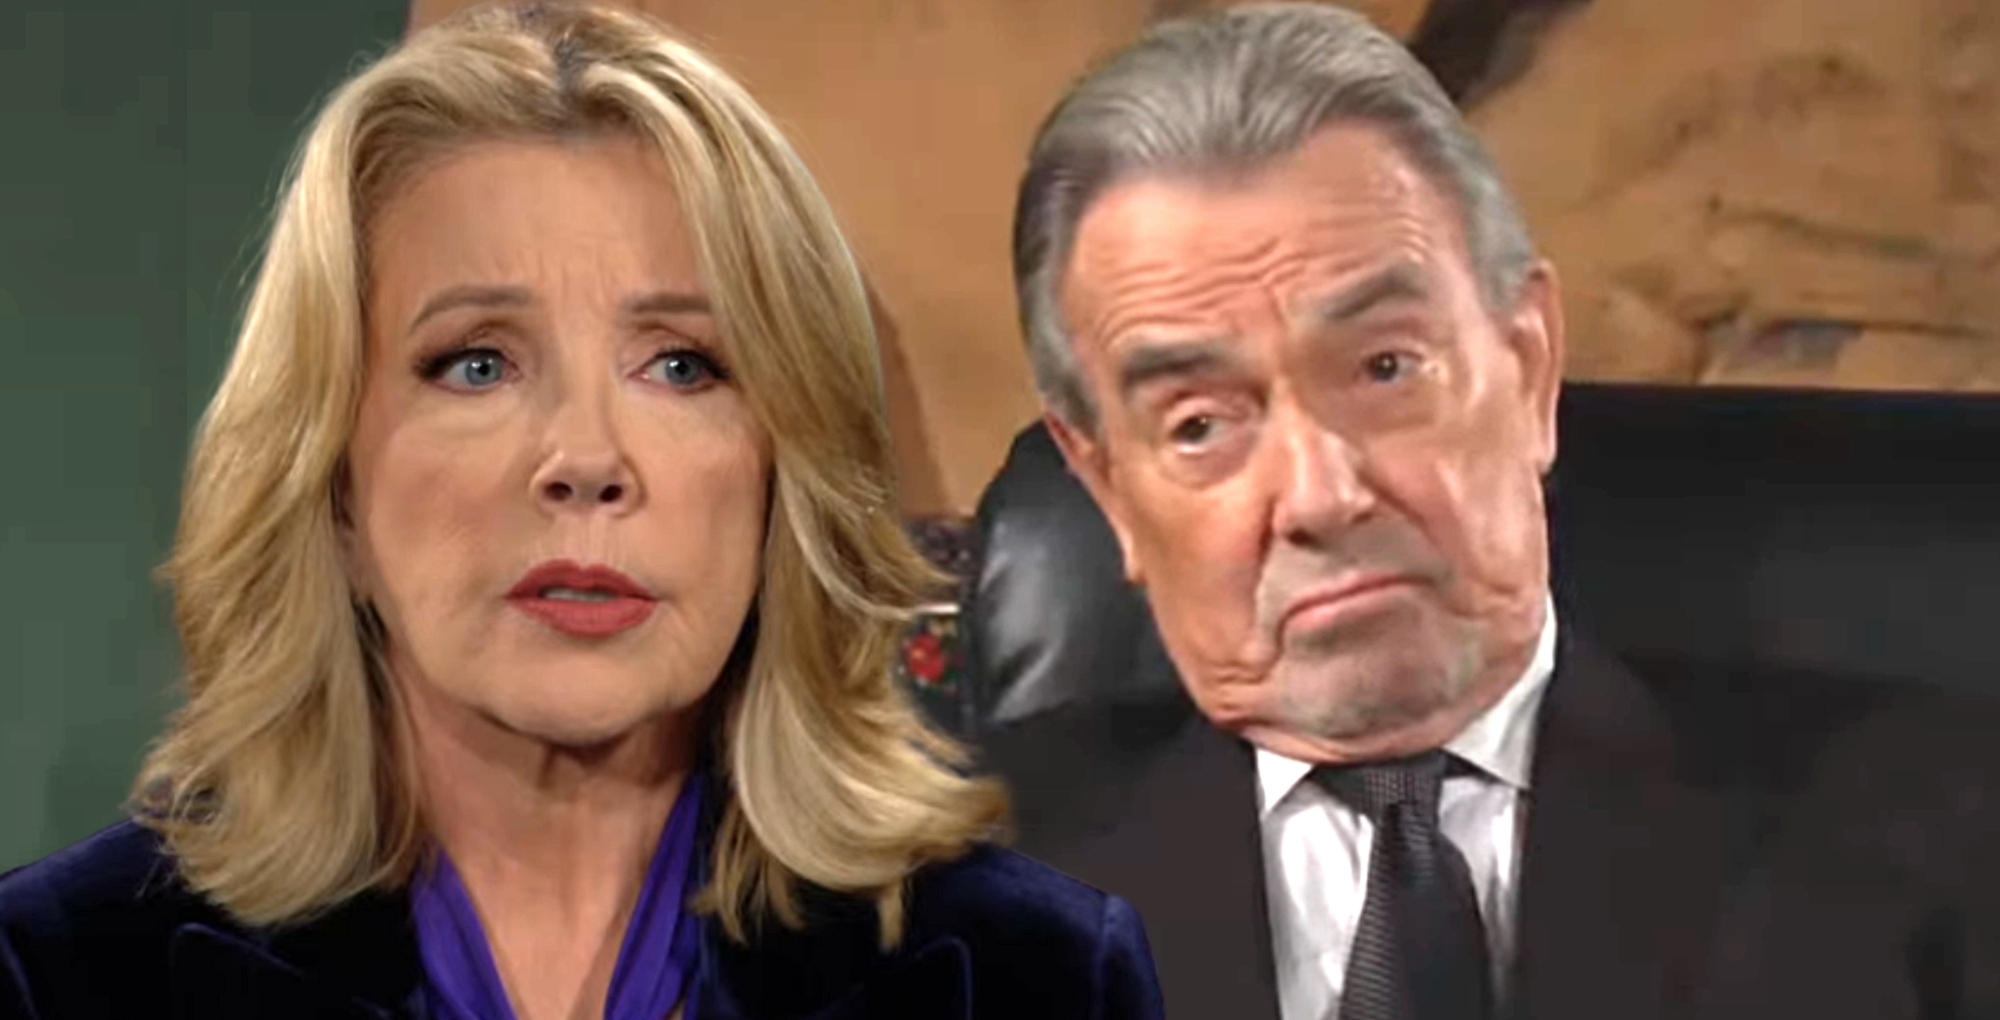 nikki newman and victor newman on the young and the restless.